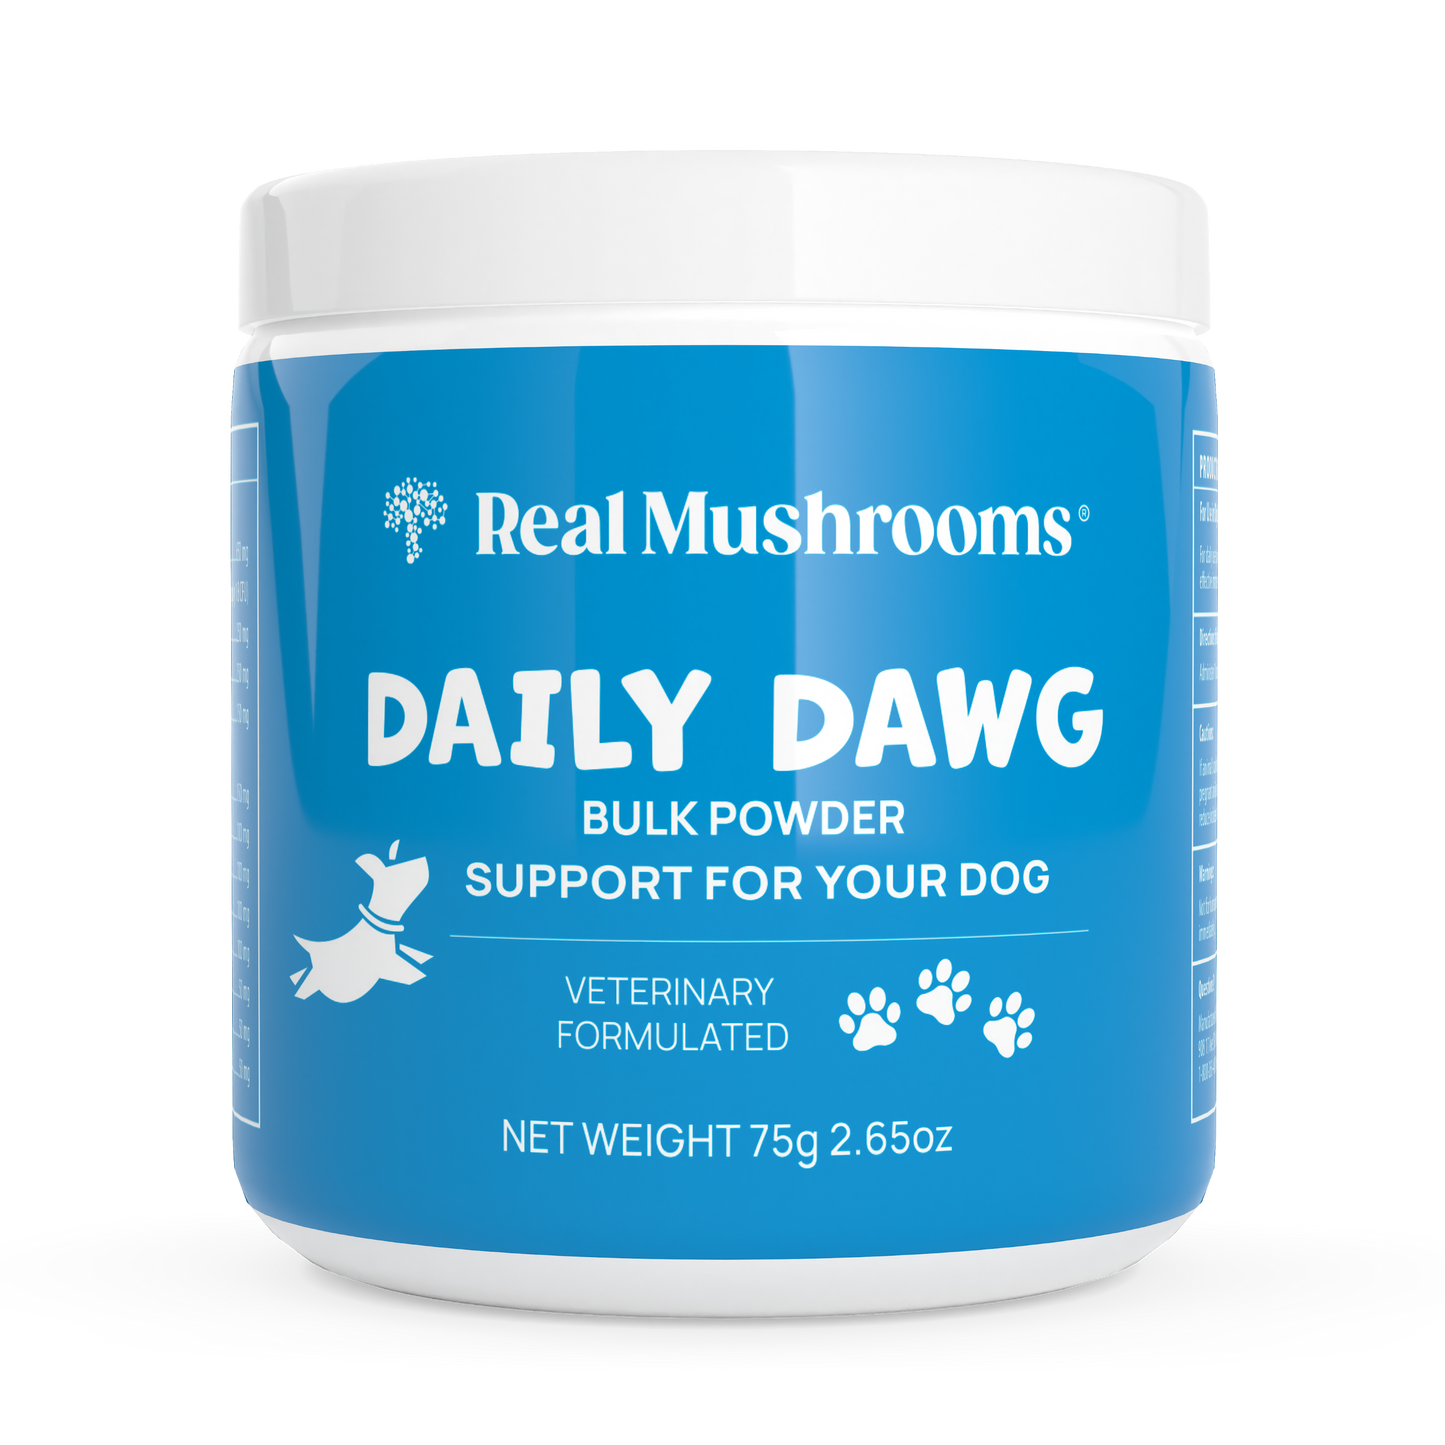 Provide your dog with daily support for general health maintenance through Real Mushrooms' veterinary-curated, Certified Organic Daily Dawg Powder for Pets.